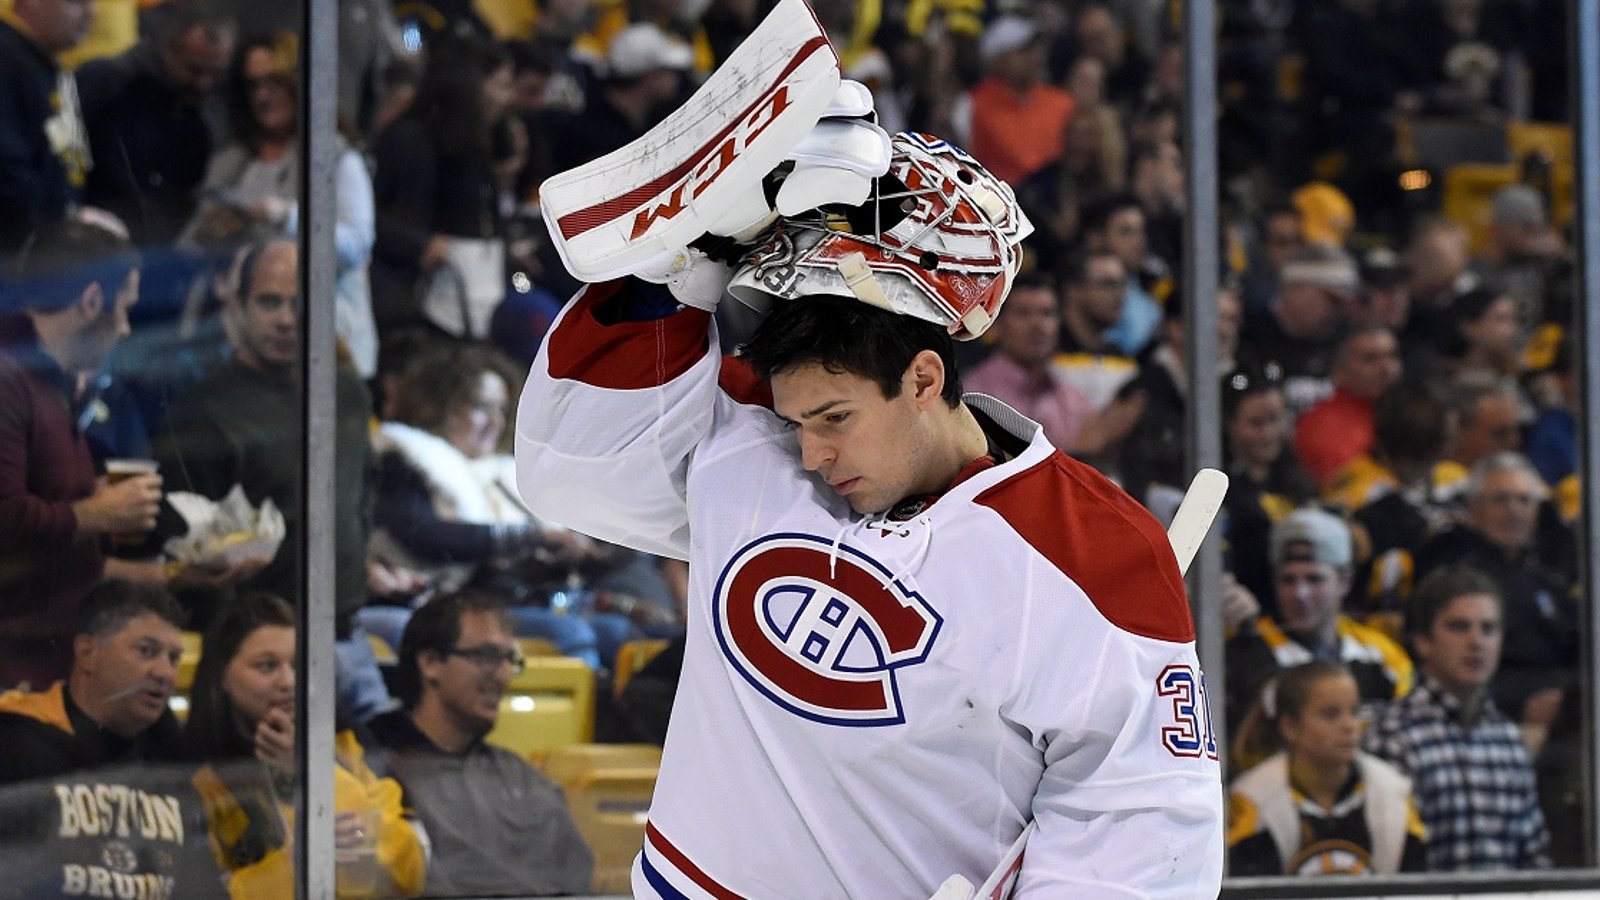 Breaking: Another major red flag for Carey Price. 